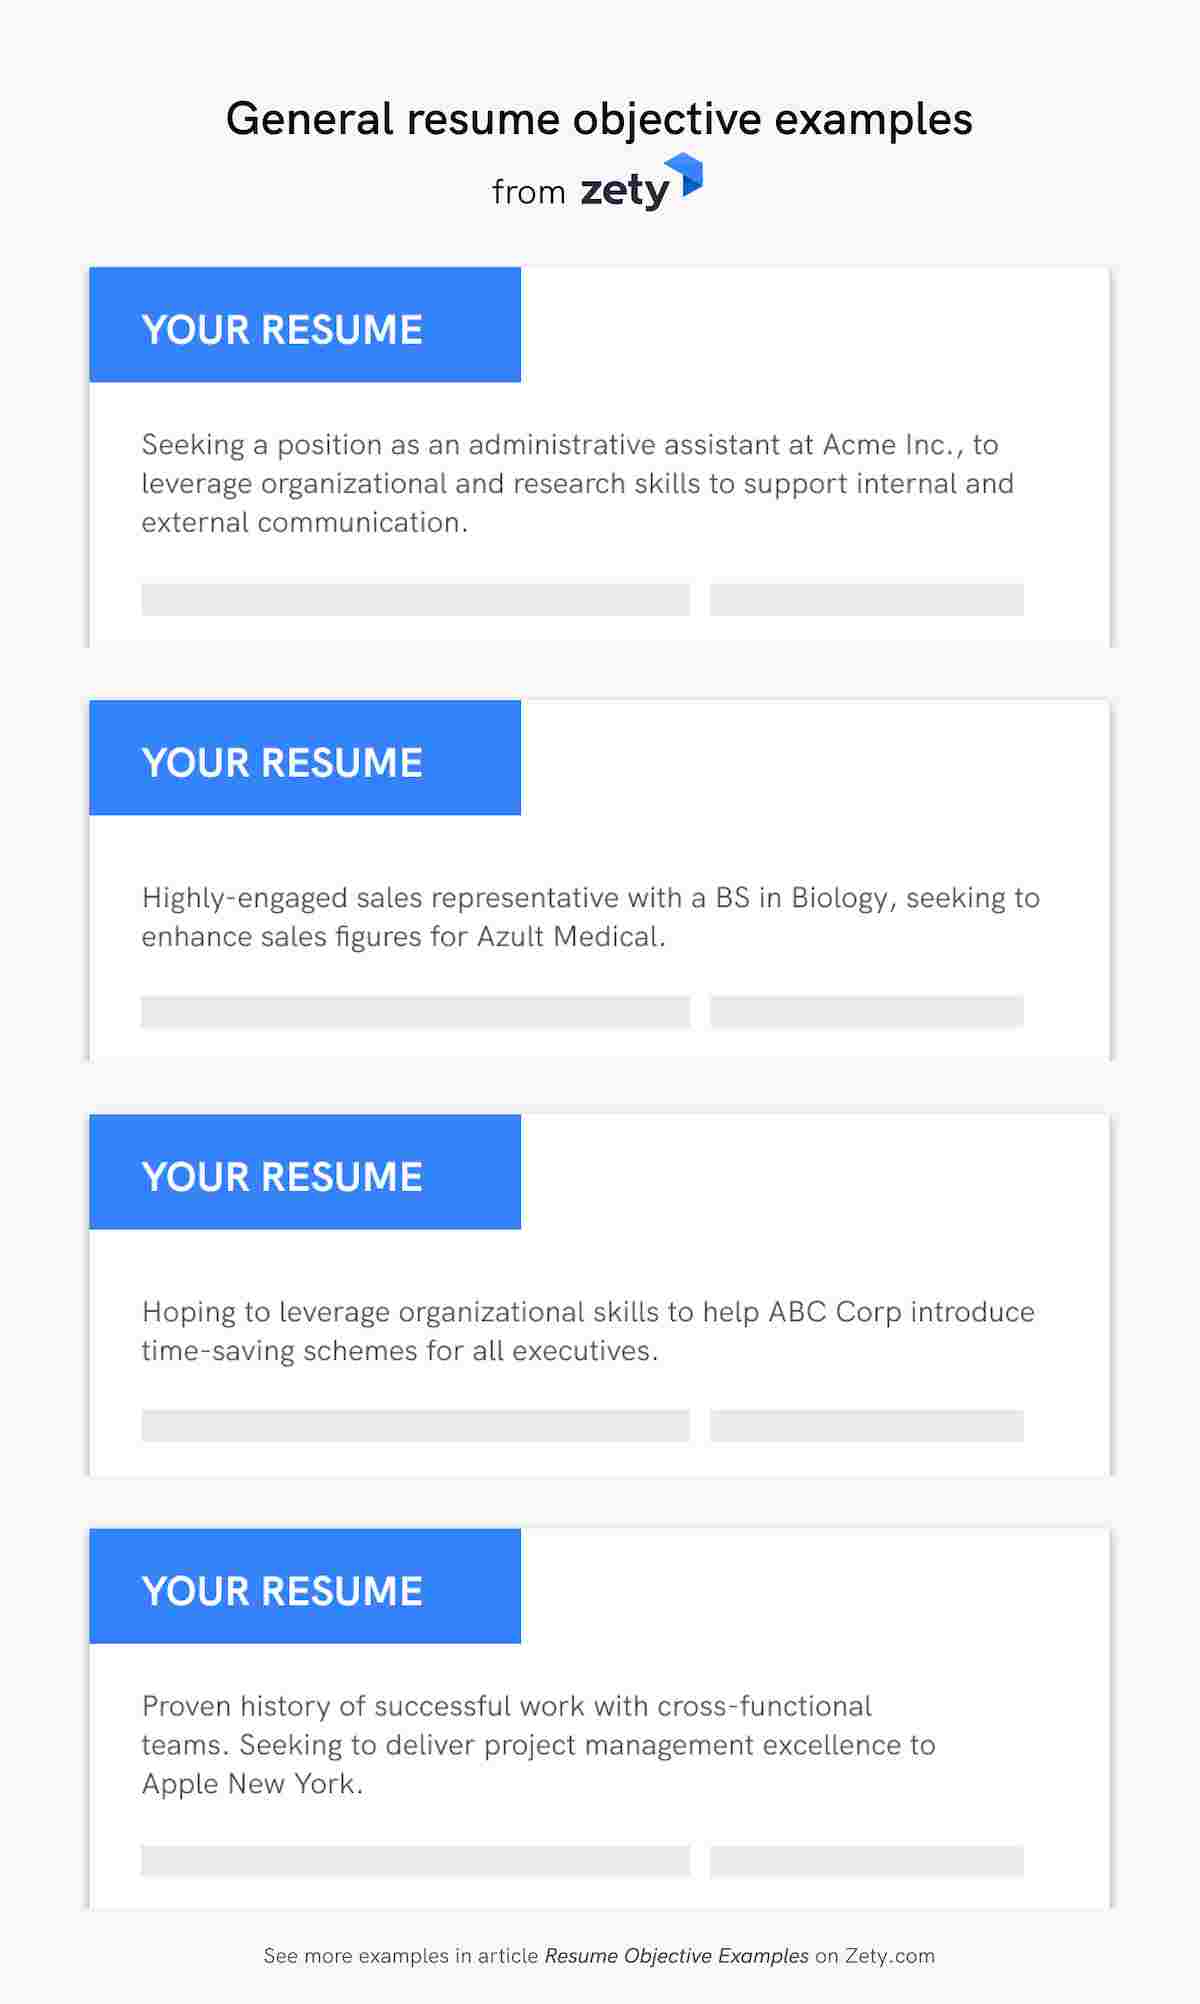 18+ Resume Objective Examples: Career Objectives for All Jobs